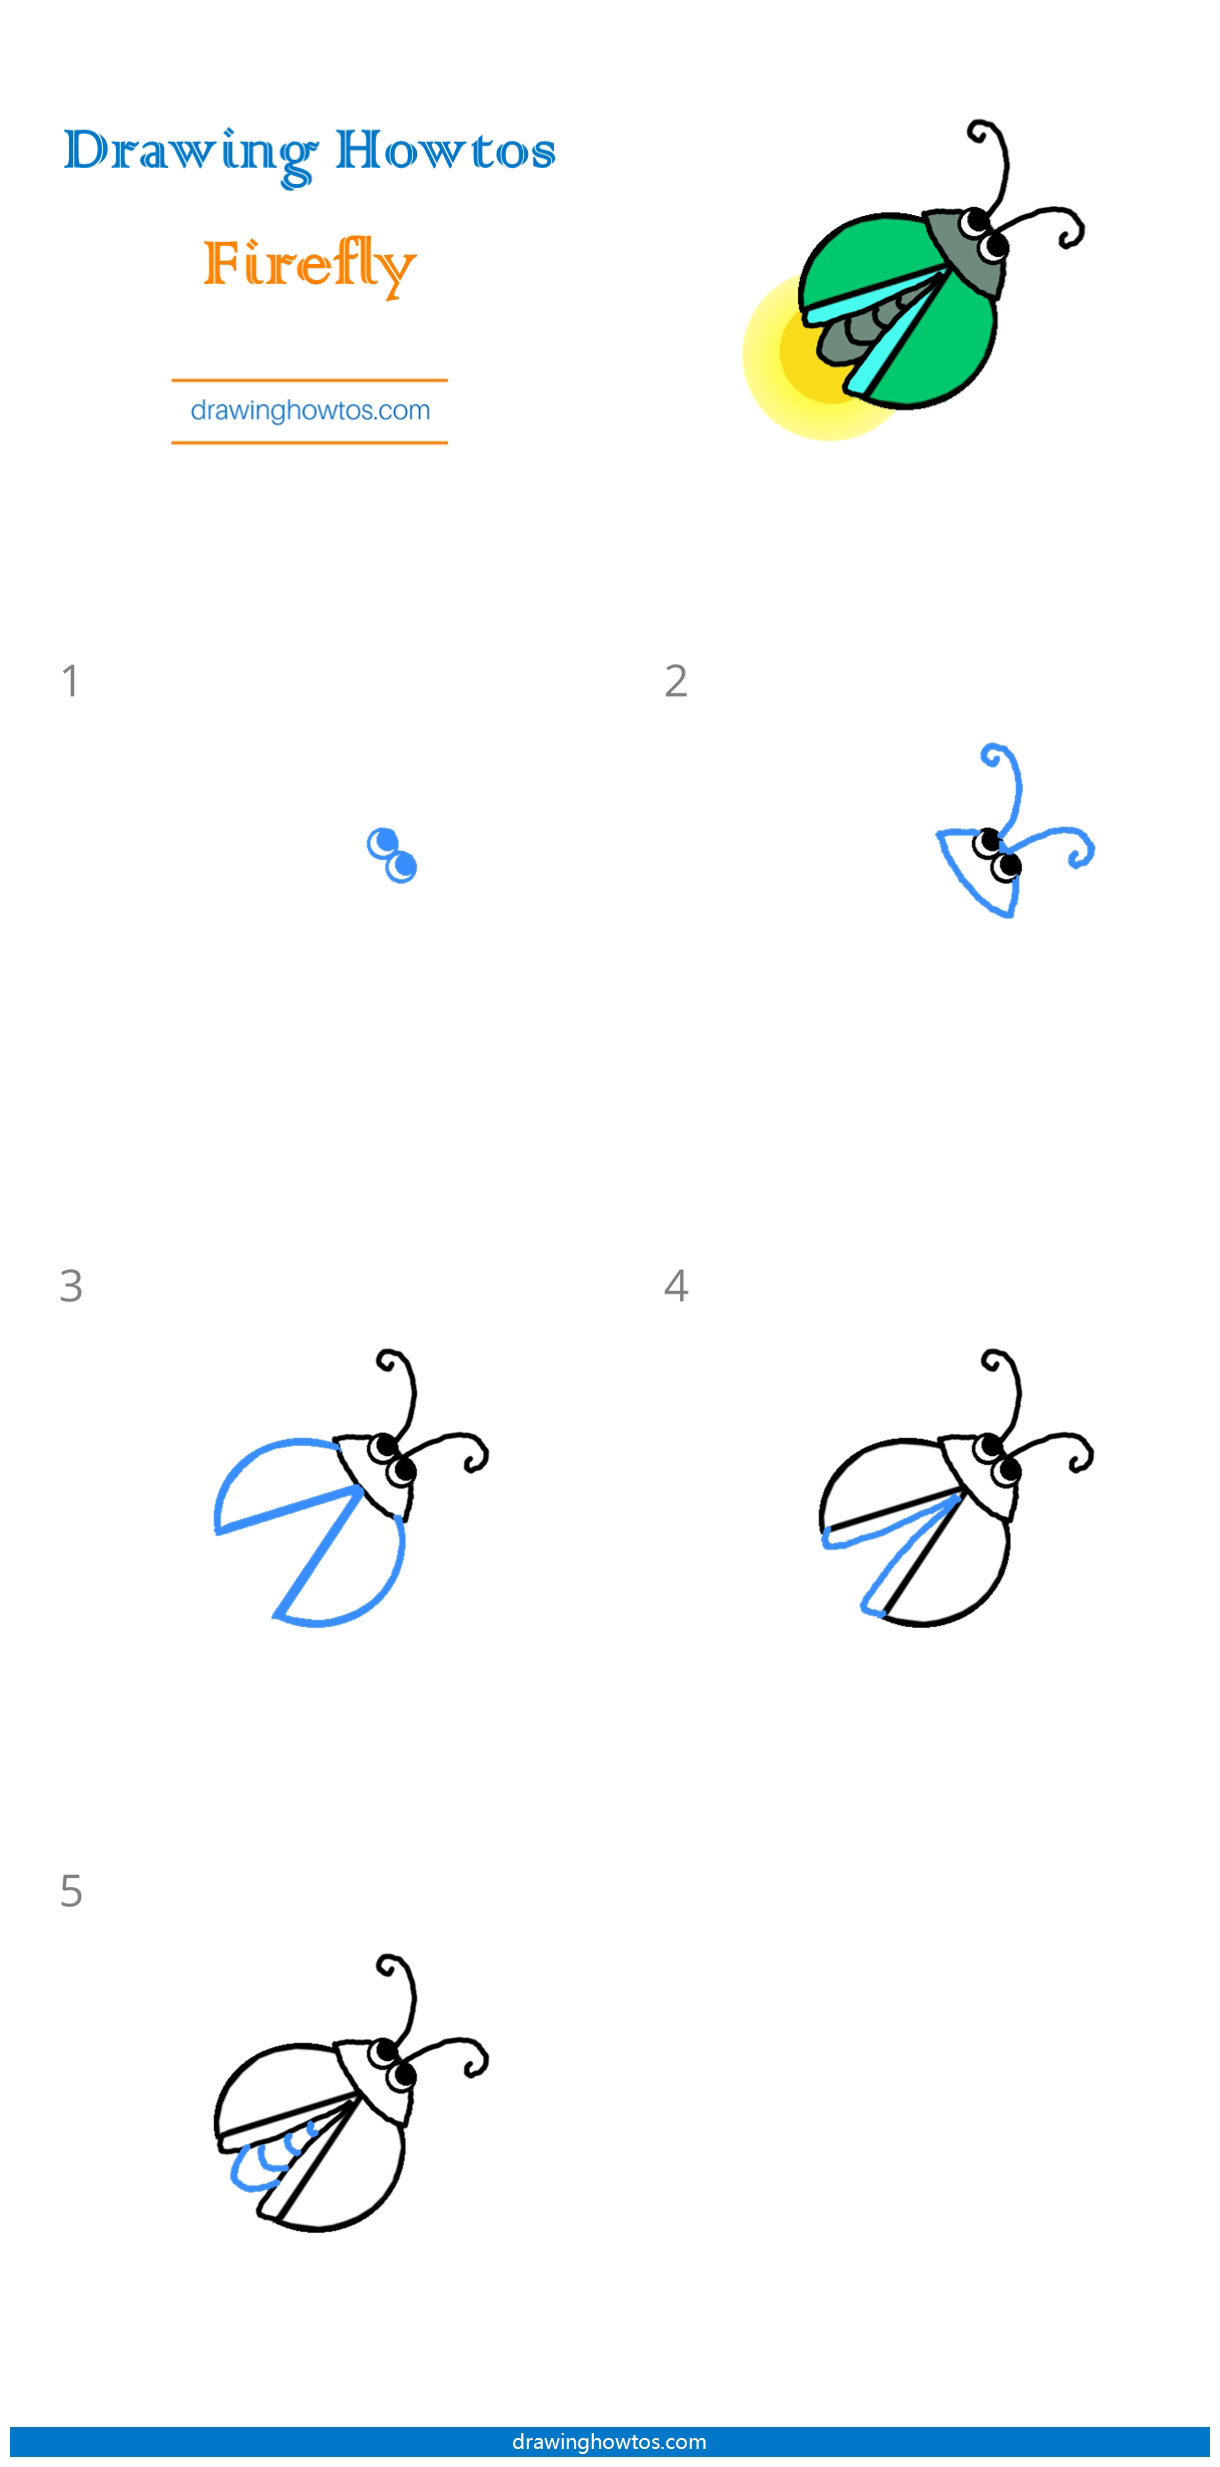 How to Draw a Firefly Step by Step